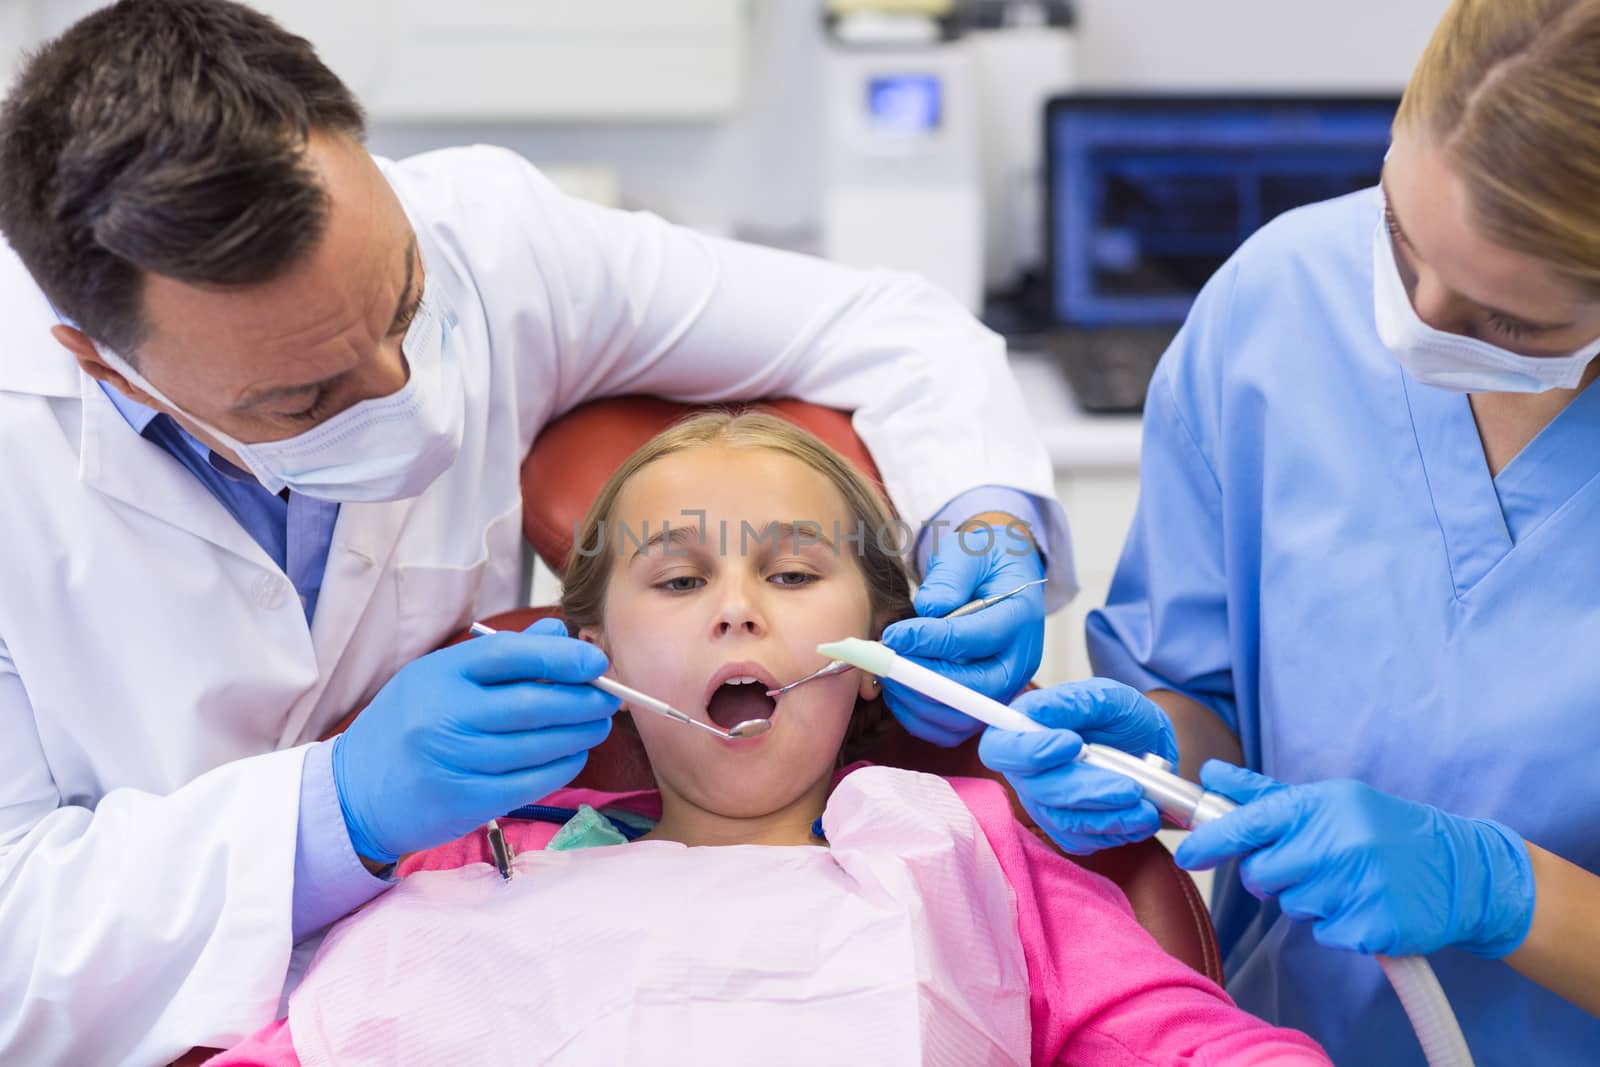 Dentist and nurse examining a young patient with tools by Wavebreakmedia